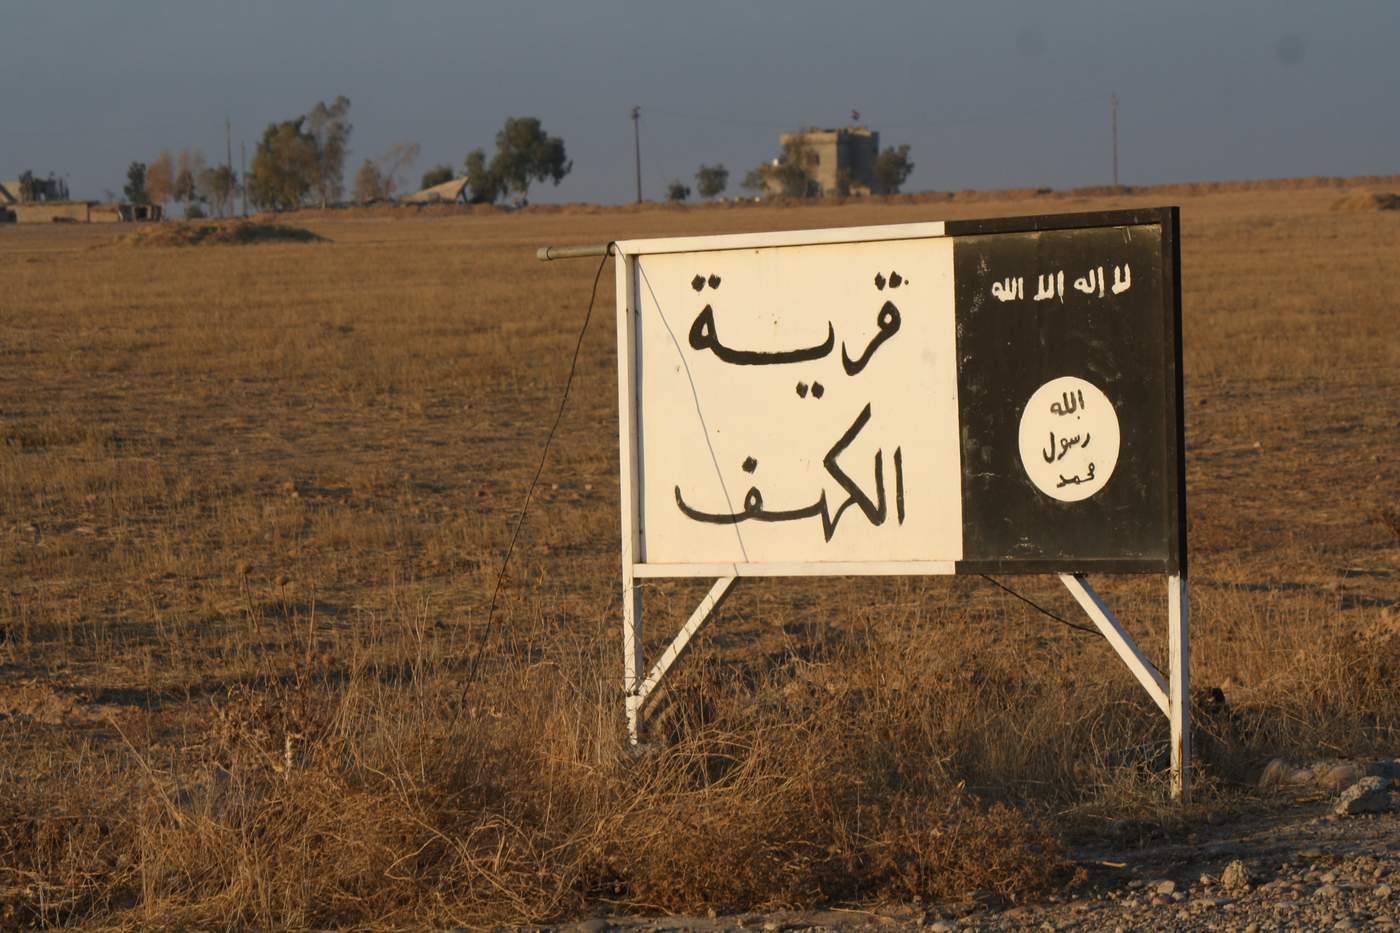 Infrastructure like this road signs saying &quot;The Village of al-Kahf&quot; along with the IS logo in the countryside south of Mosul demonstrate how deeply entrenched the militant group became into local societies. (H. Murdock\/VOA) Dec. 11, 2016)